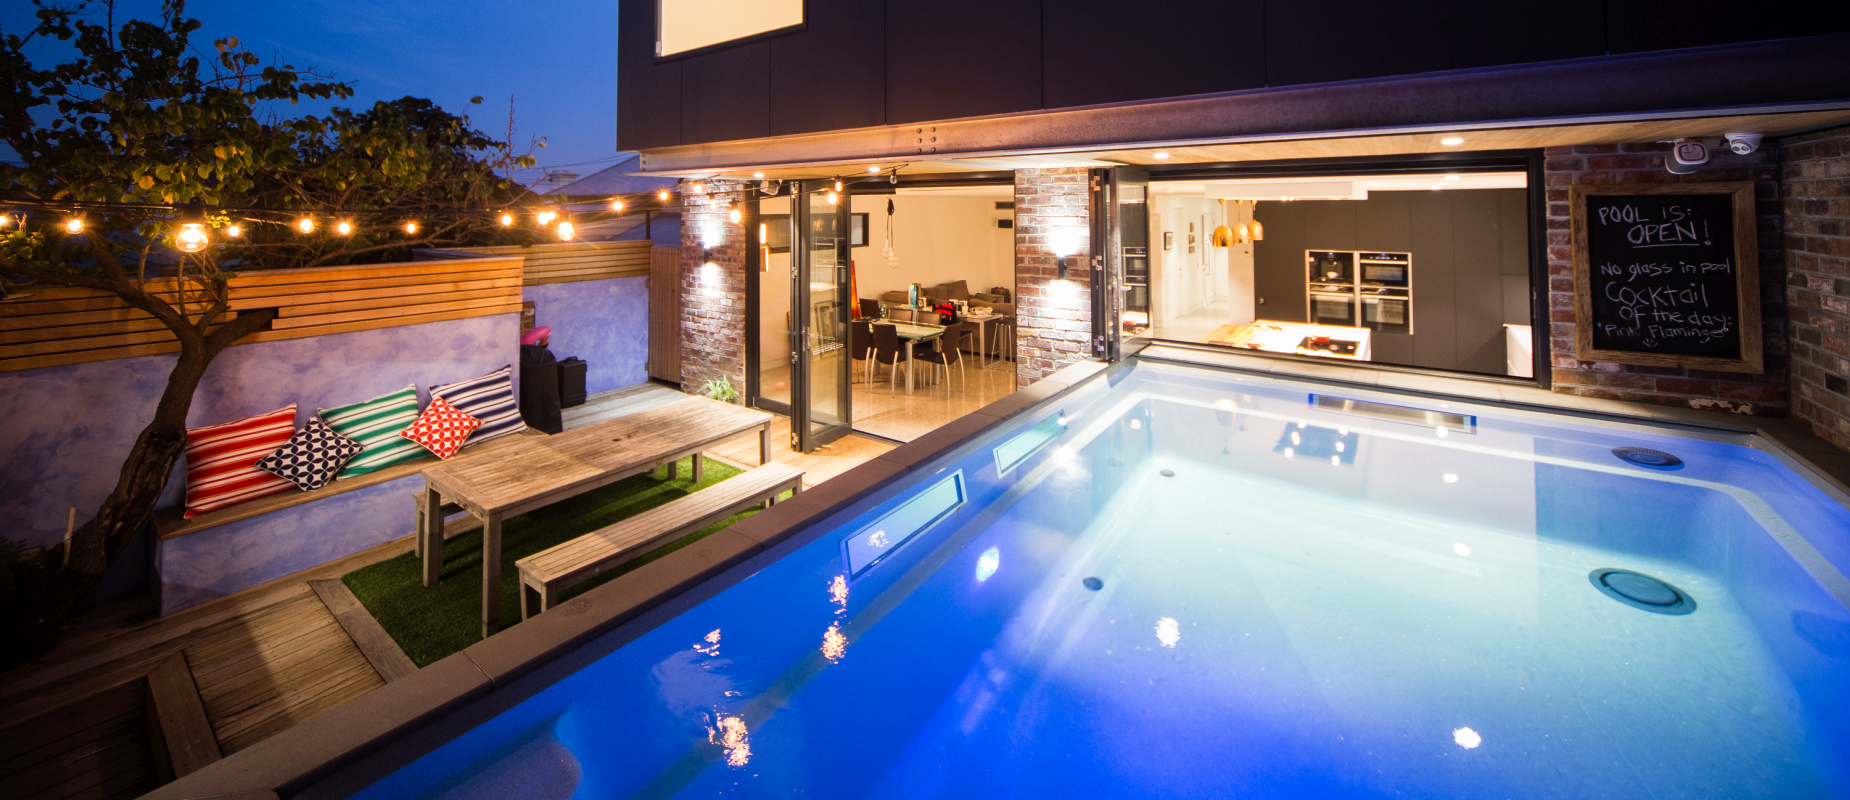 Compass-Pools-Australia_Plunge-Courtyard_Intelligent-pool-with-lights